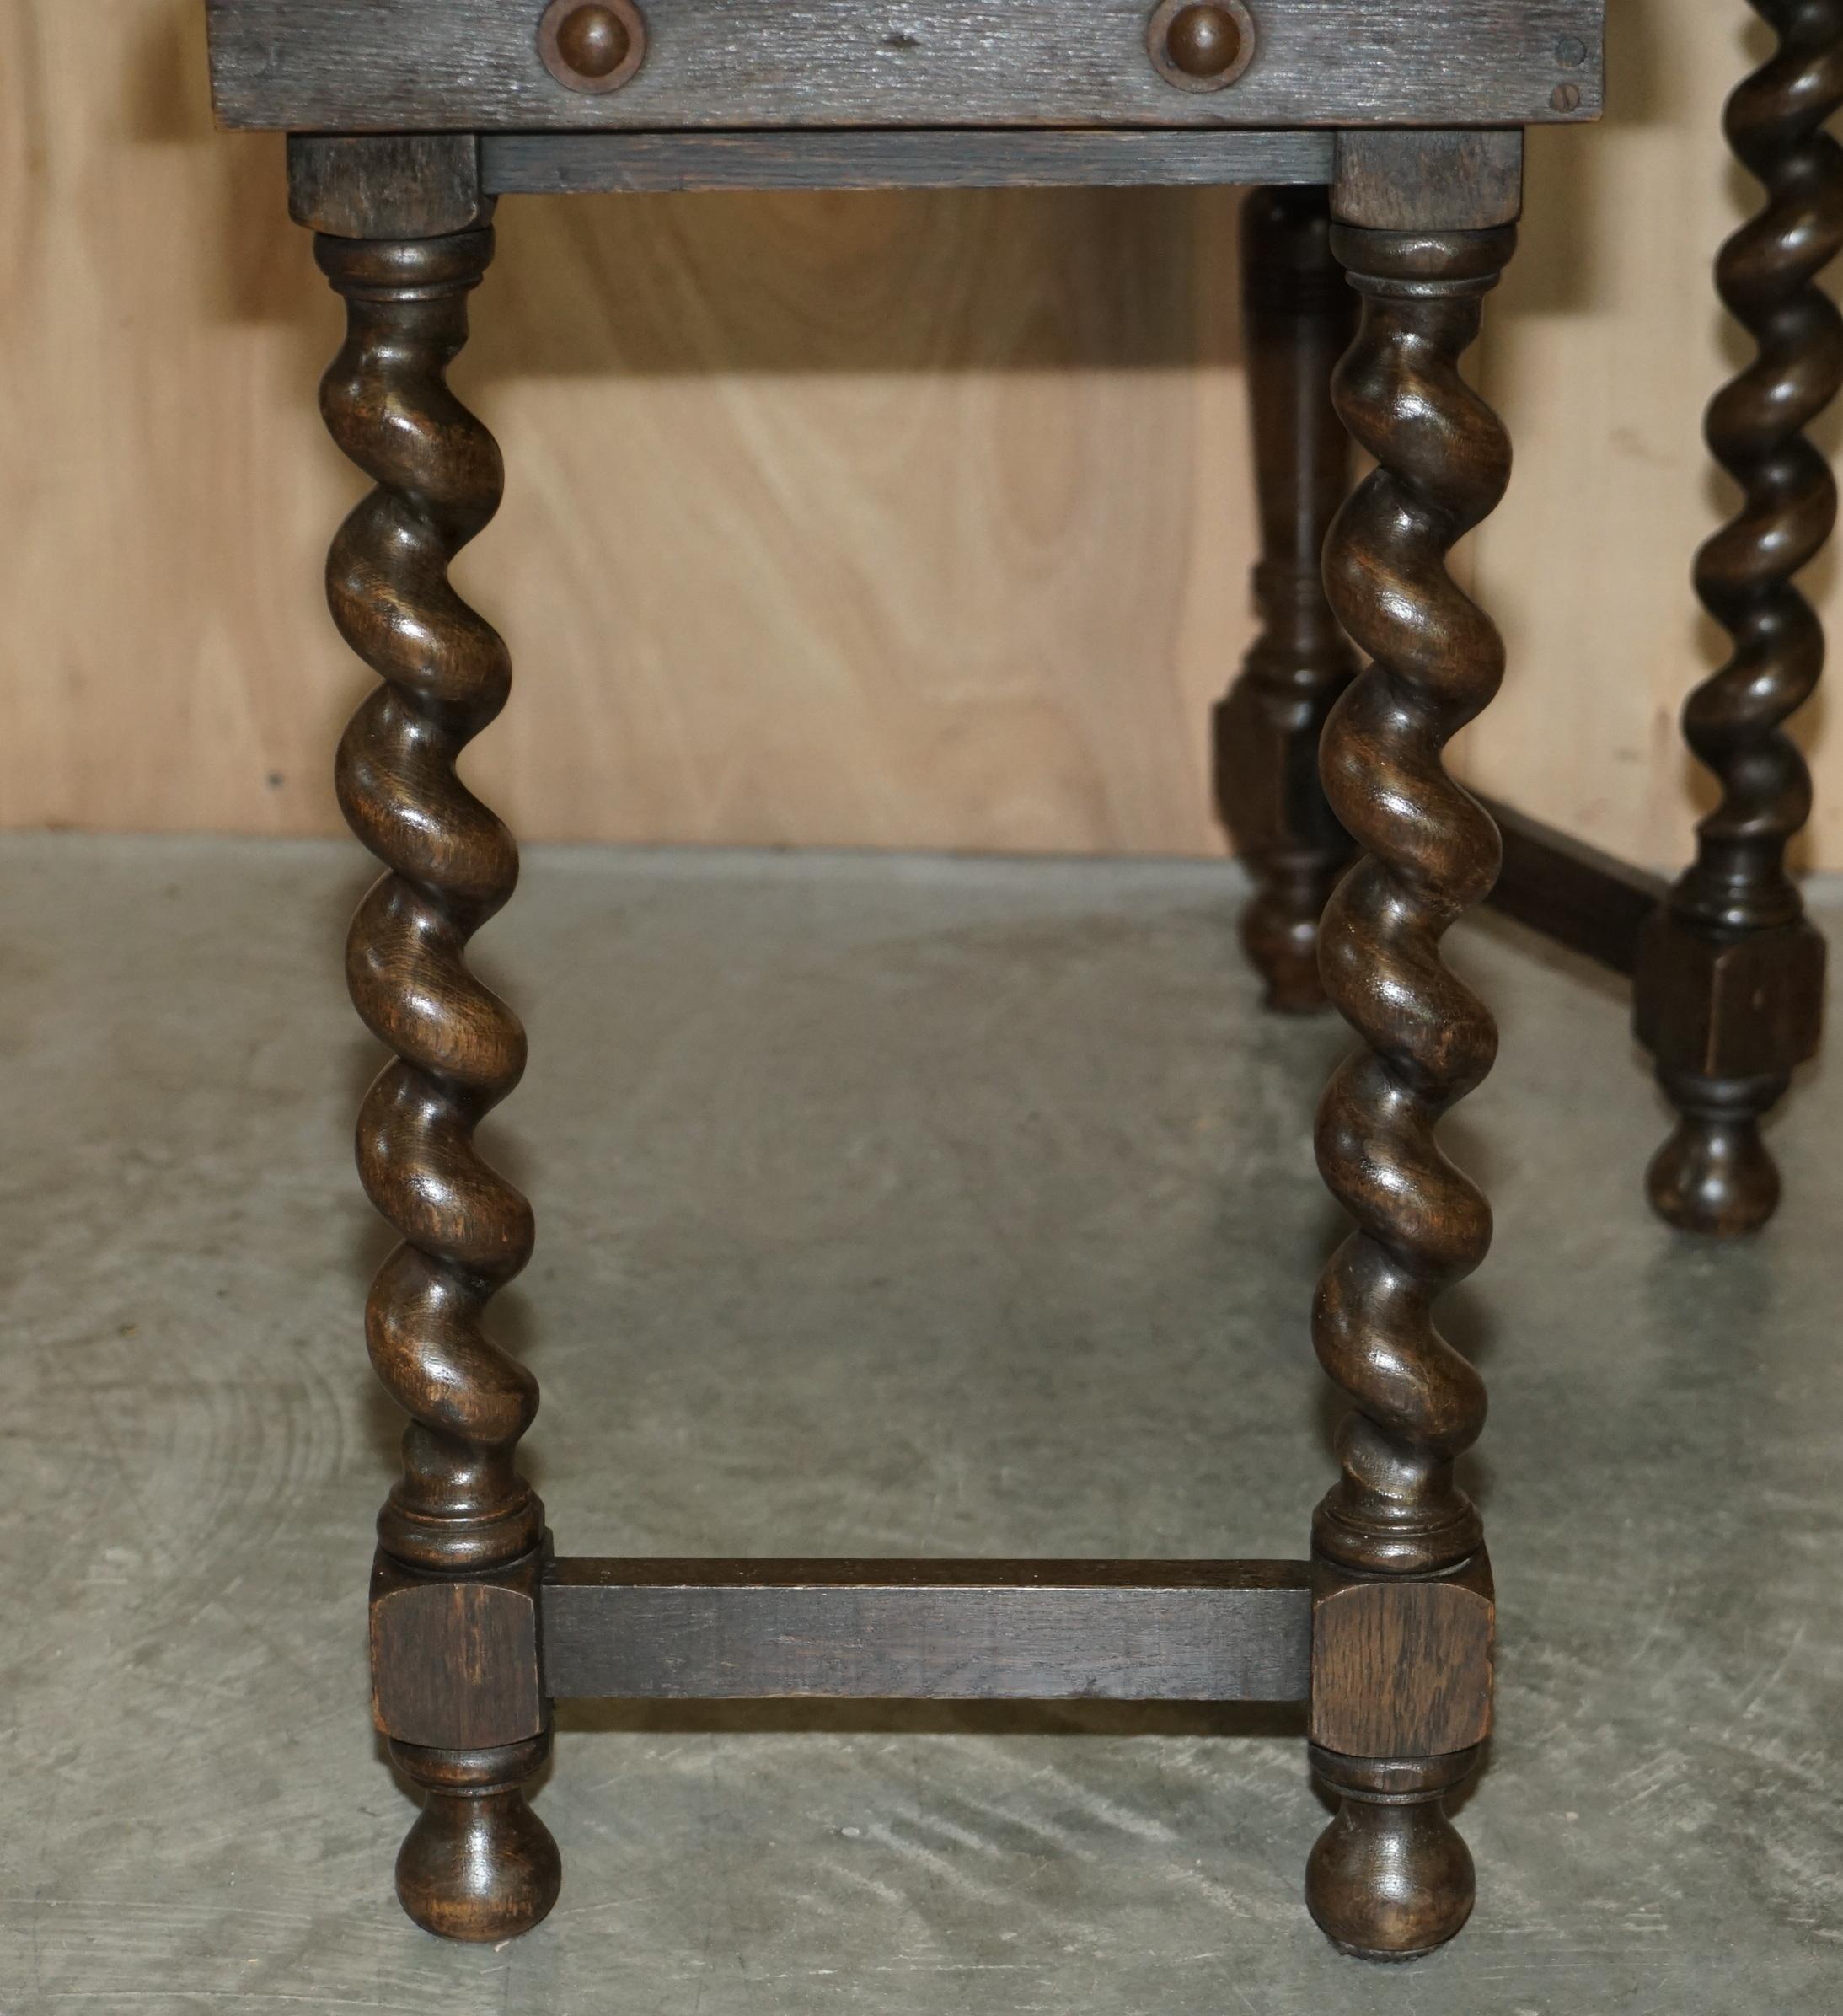 RARE & COLLECTABLE ANTIQUE JACOBEAN REVIVAL BARLEY TWiST LEG ENGLISH HUNT TABLE For Sale 8